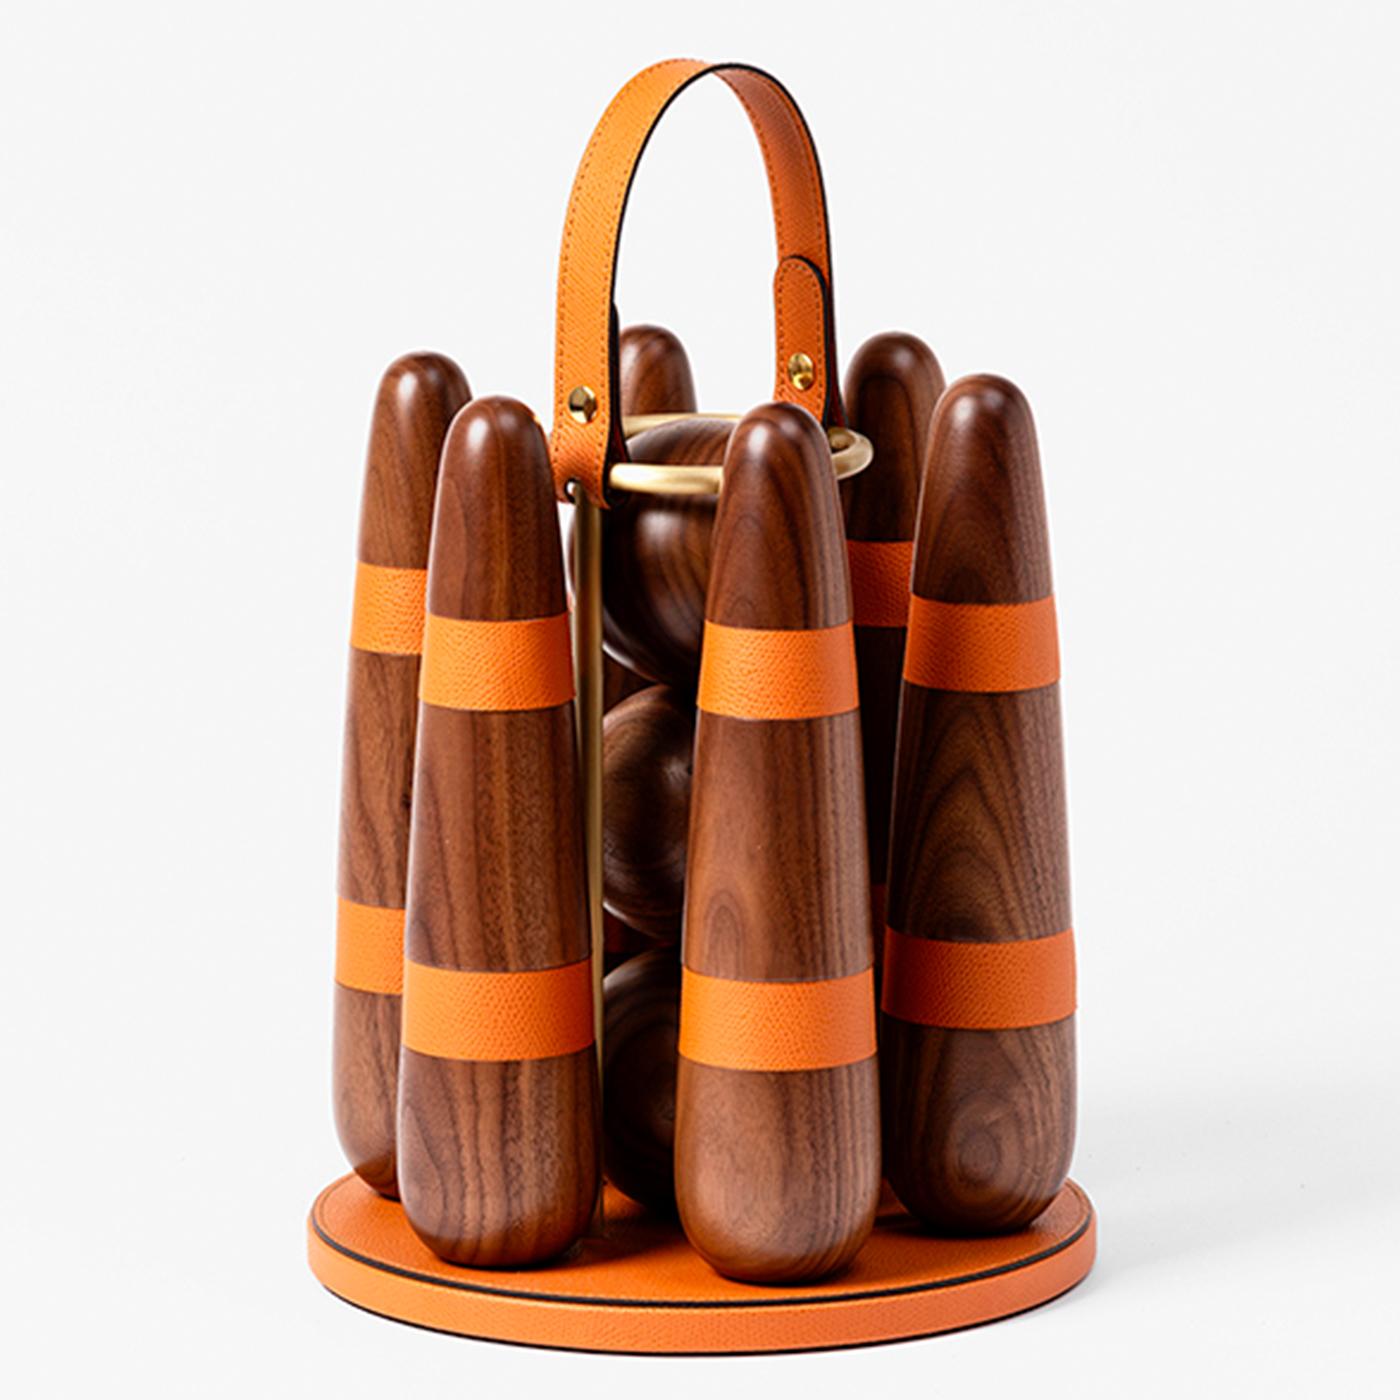 Handcrafted of Canaletto walnut, this portable bowling set includes three balls and six stylized pins with biscuit leather details. A sophisticated gift for any age, the set comes with a stylish holder with a leather handle for easy carrying,